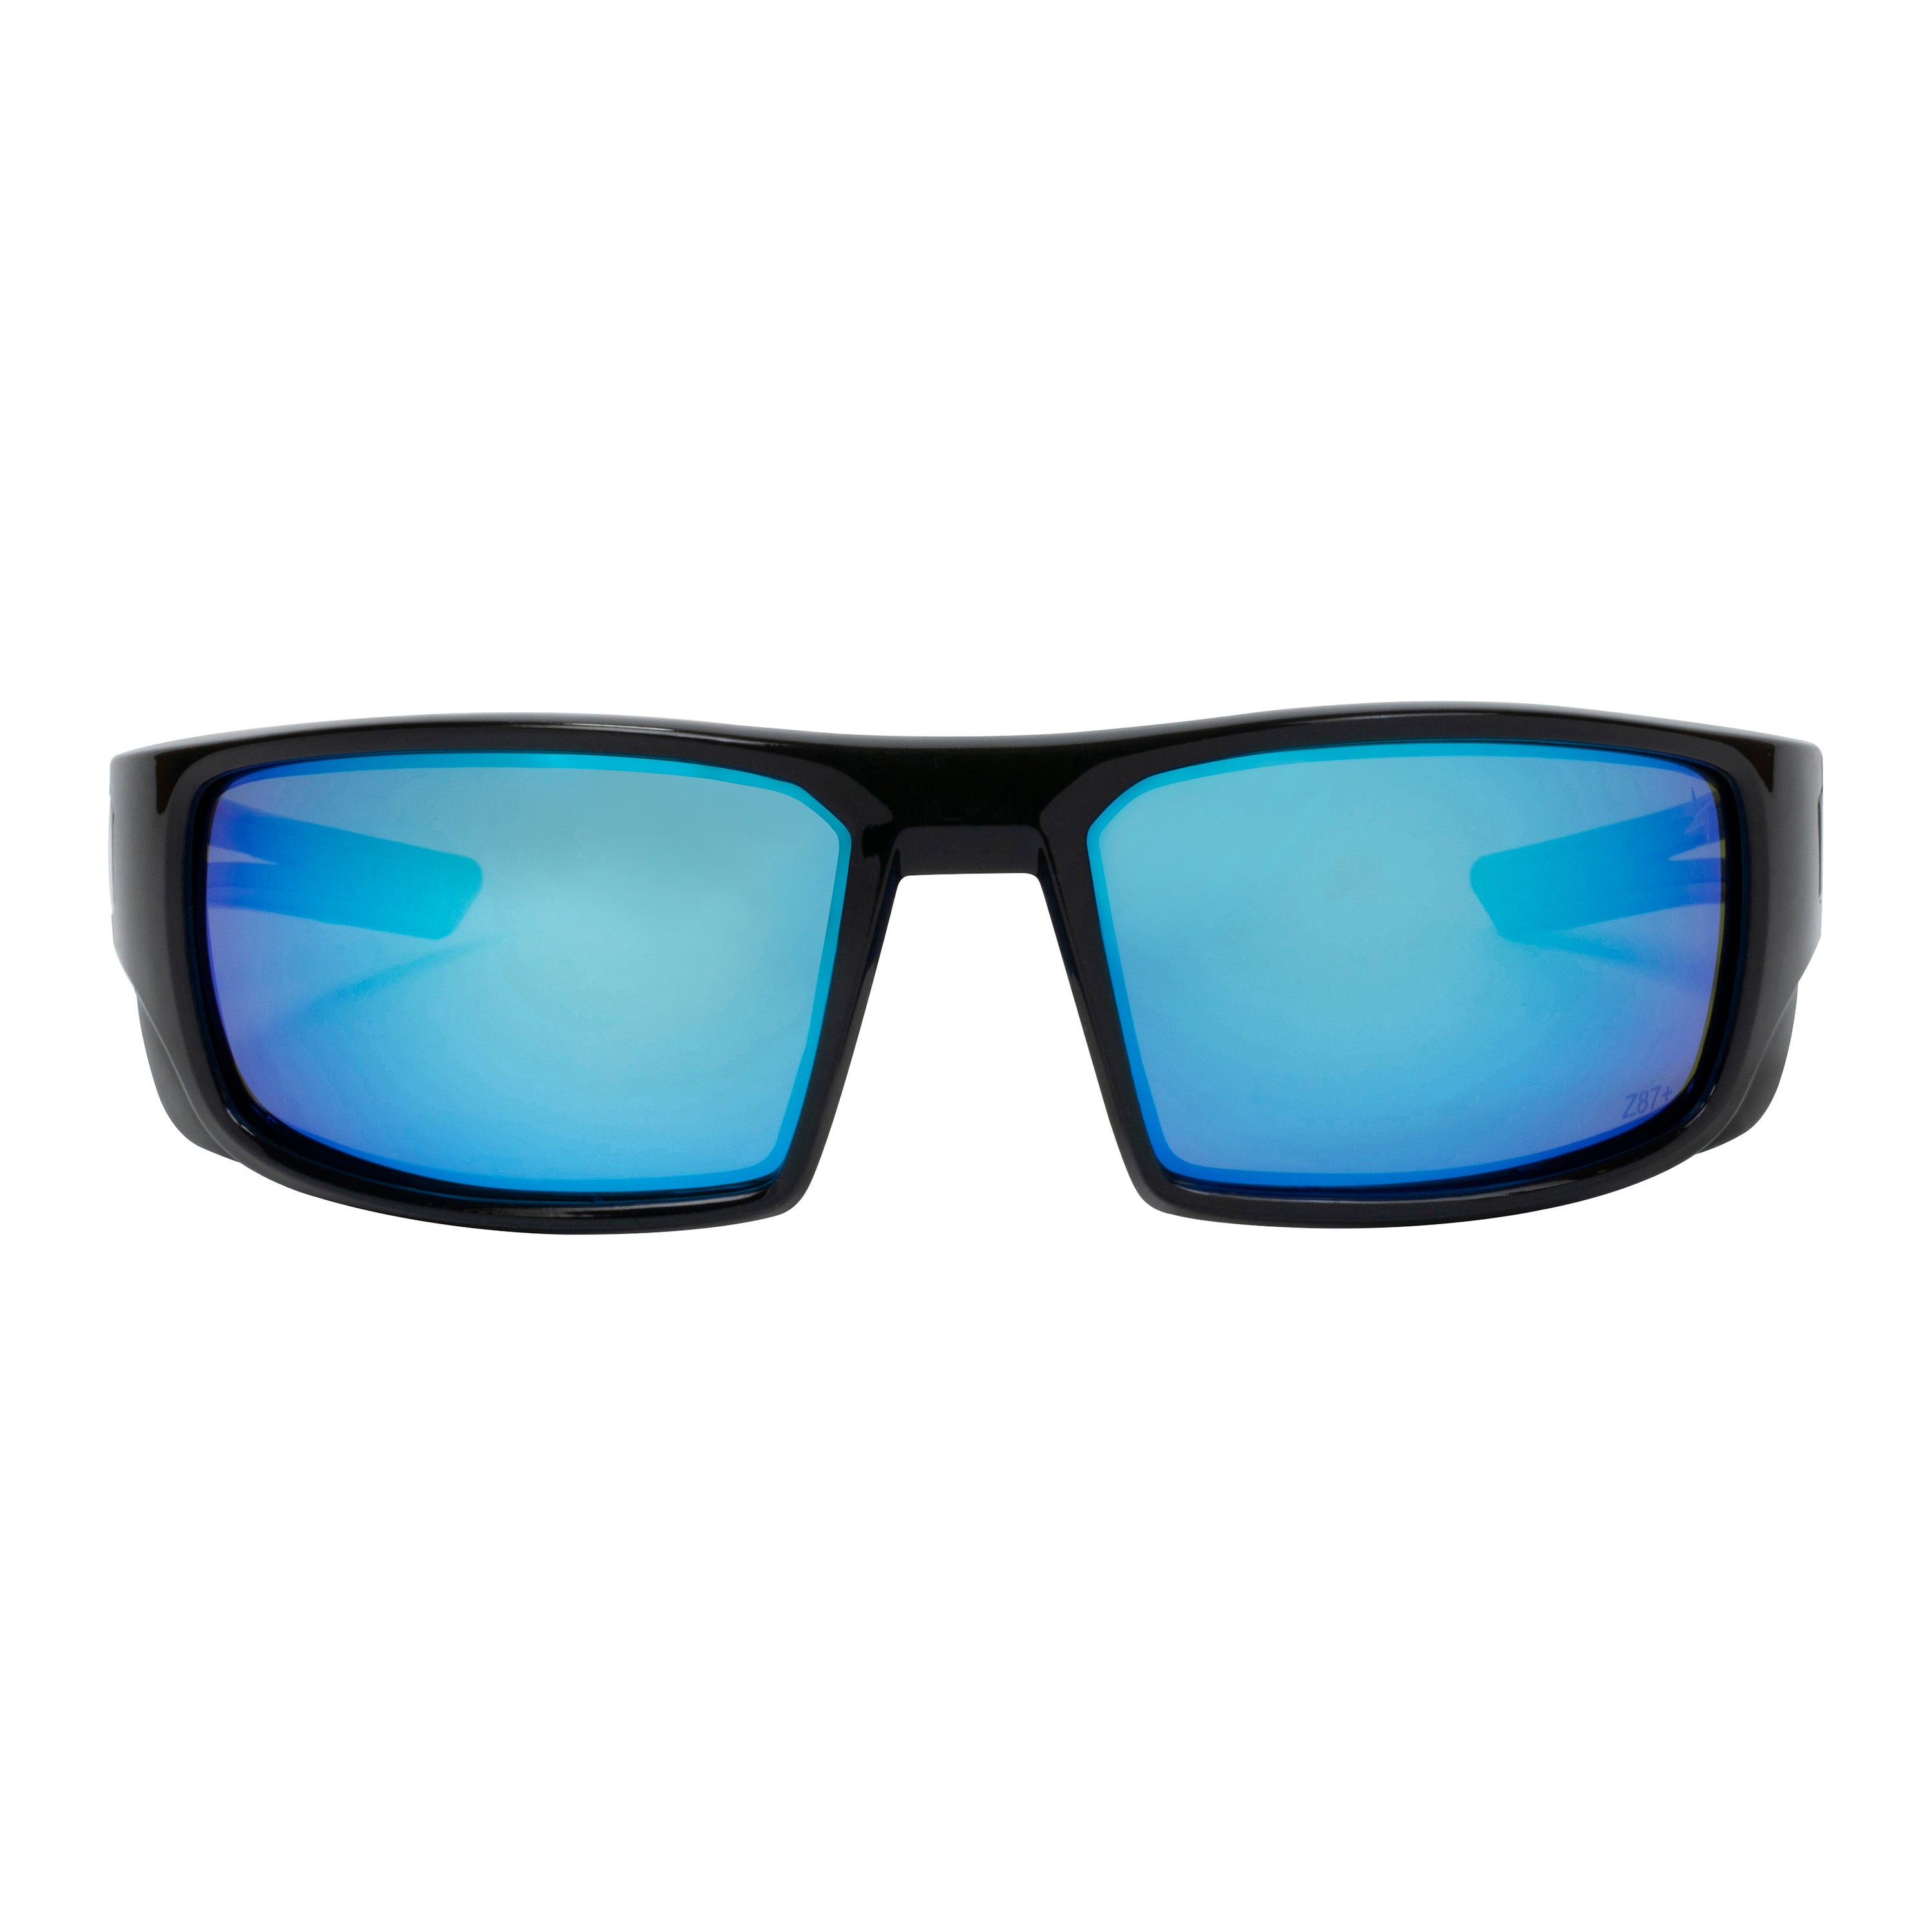 Polycarbonate Polarized Blue Mirror Lens Sport Safety Glasses with Blue Rubber Accents.